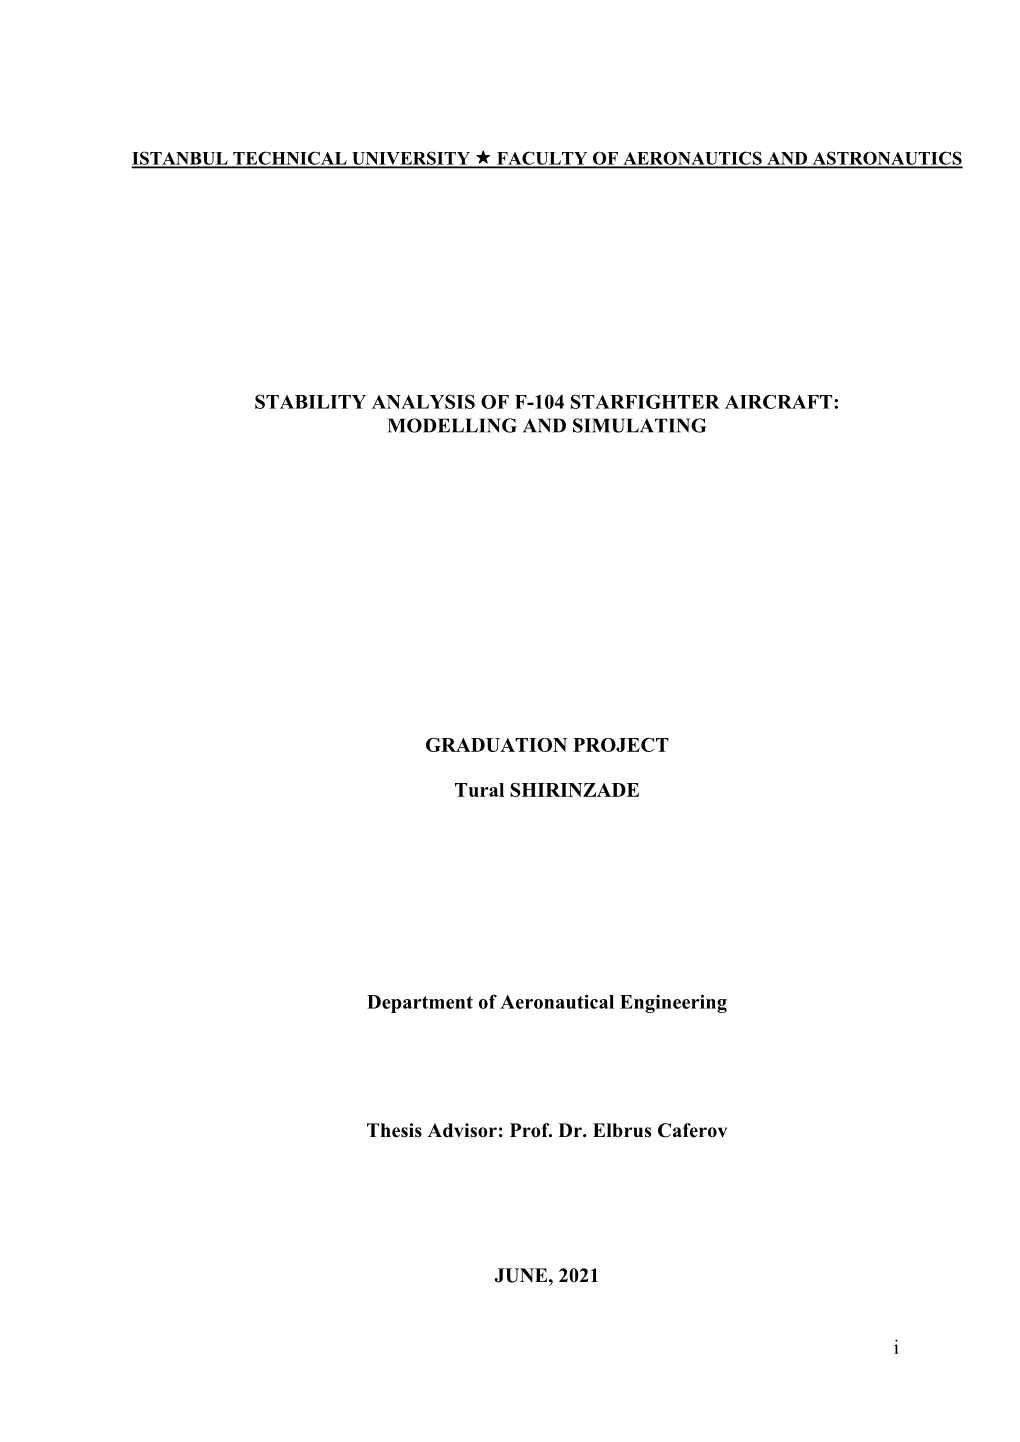 Stability Analysis of F-104 Starfighter Aircraft: Modelling and Simulating